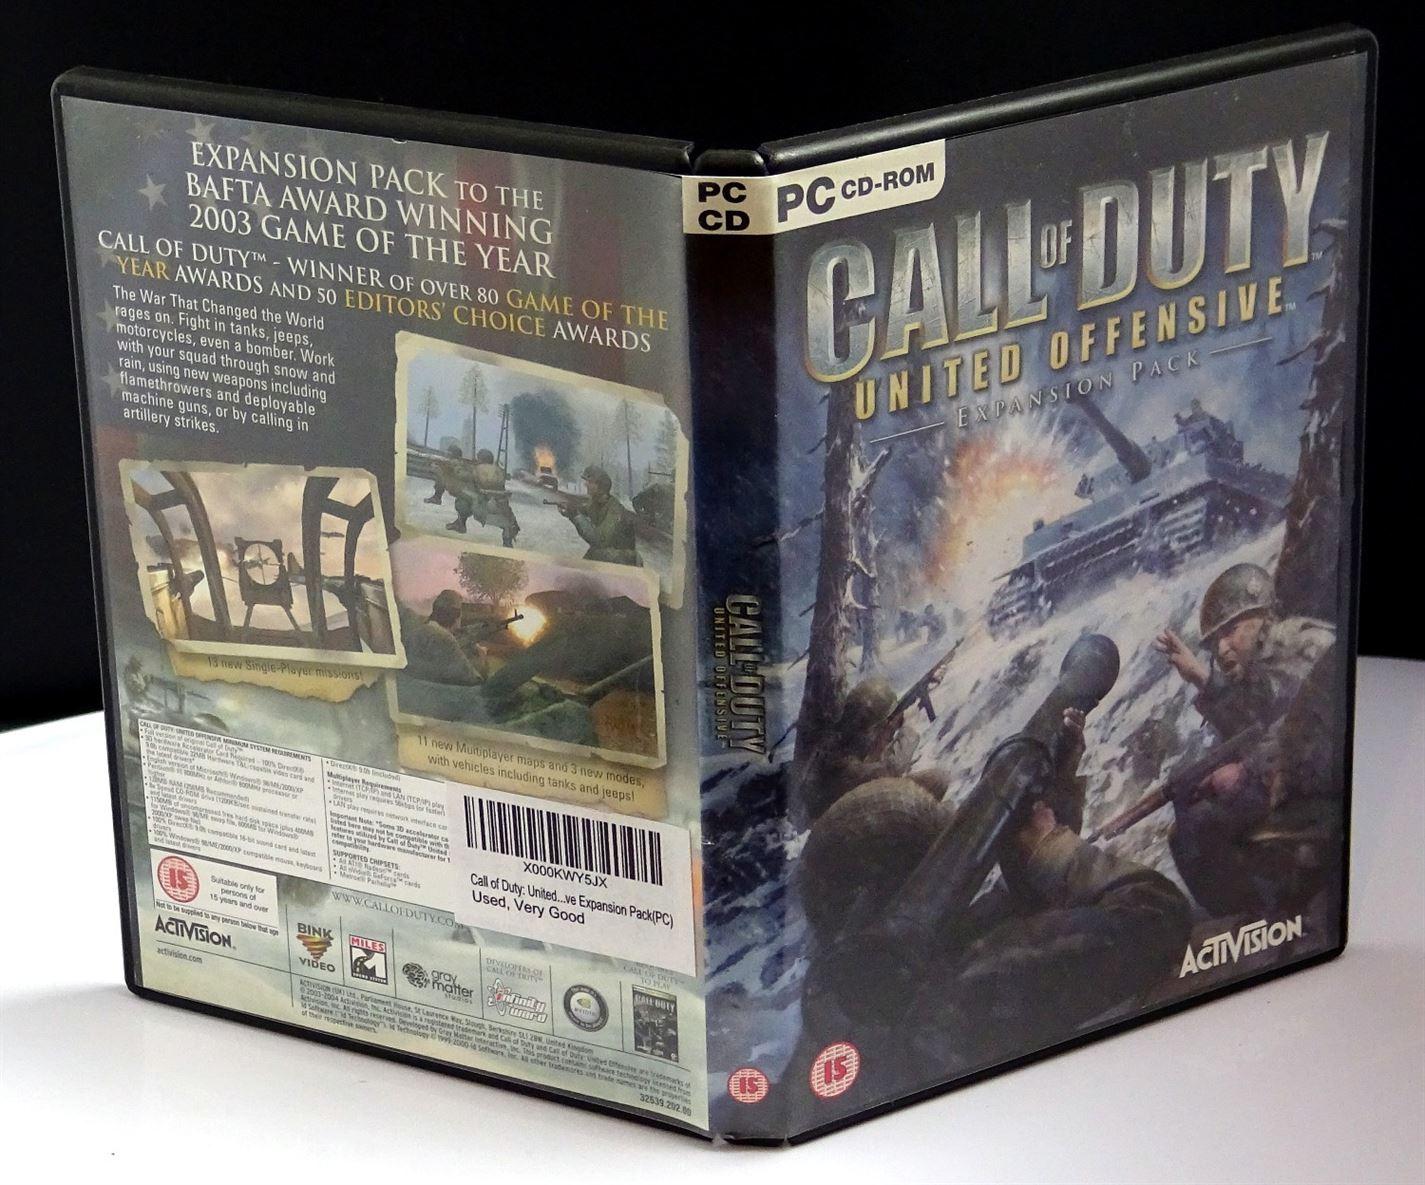 Call of Duty: United Offensive Expansion Pack (PC) - UK Seller NP